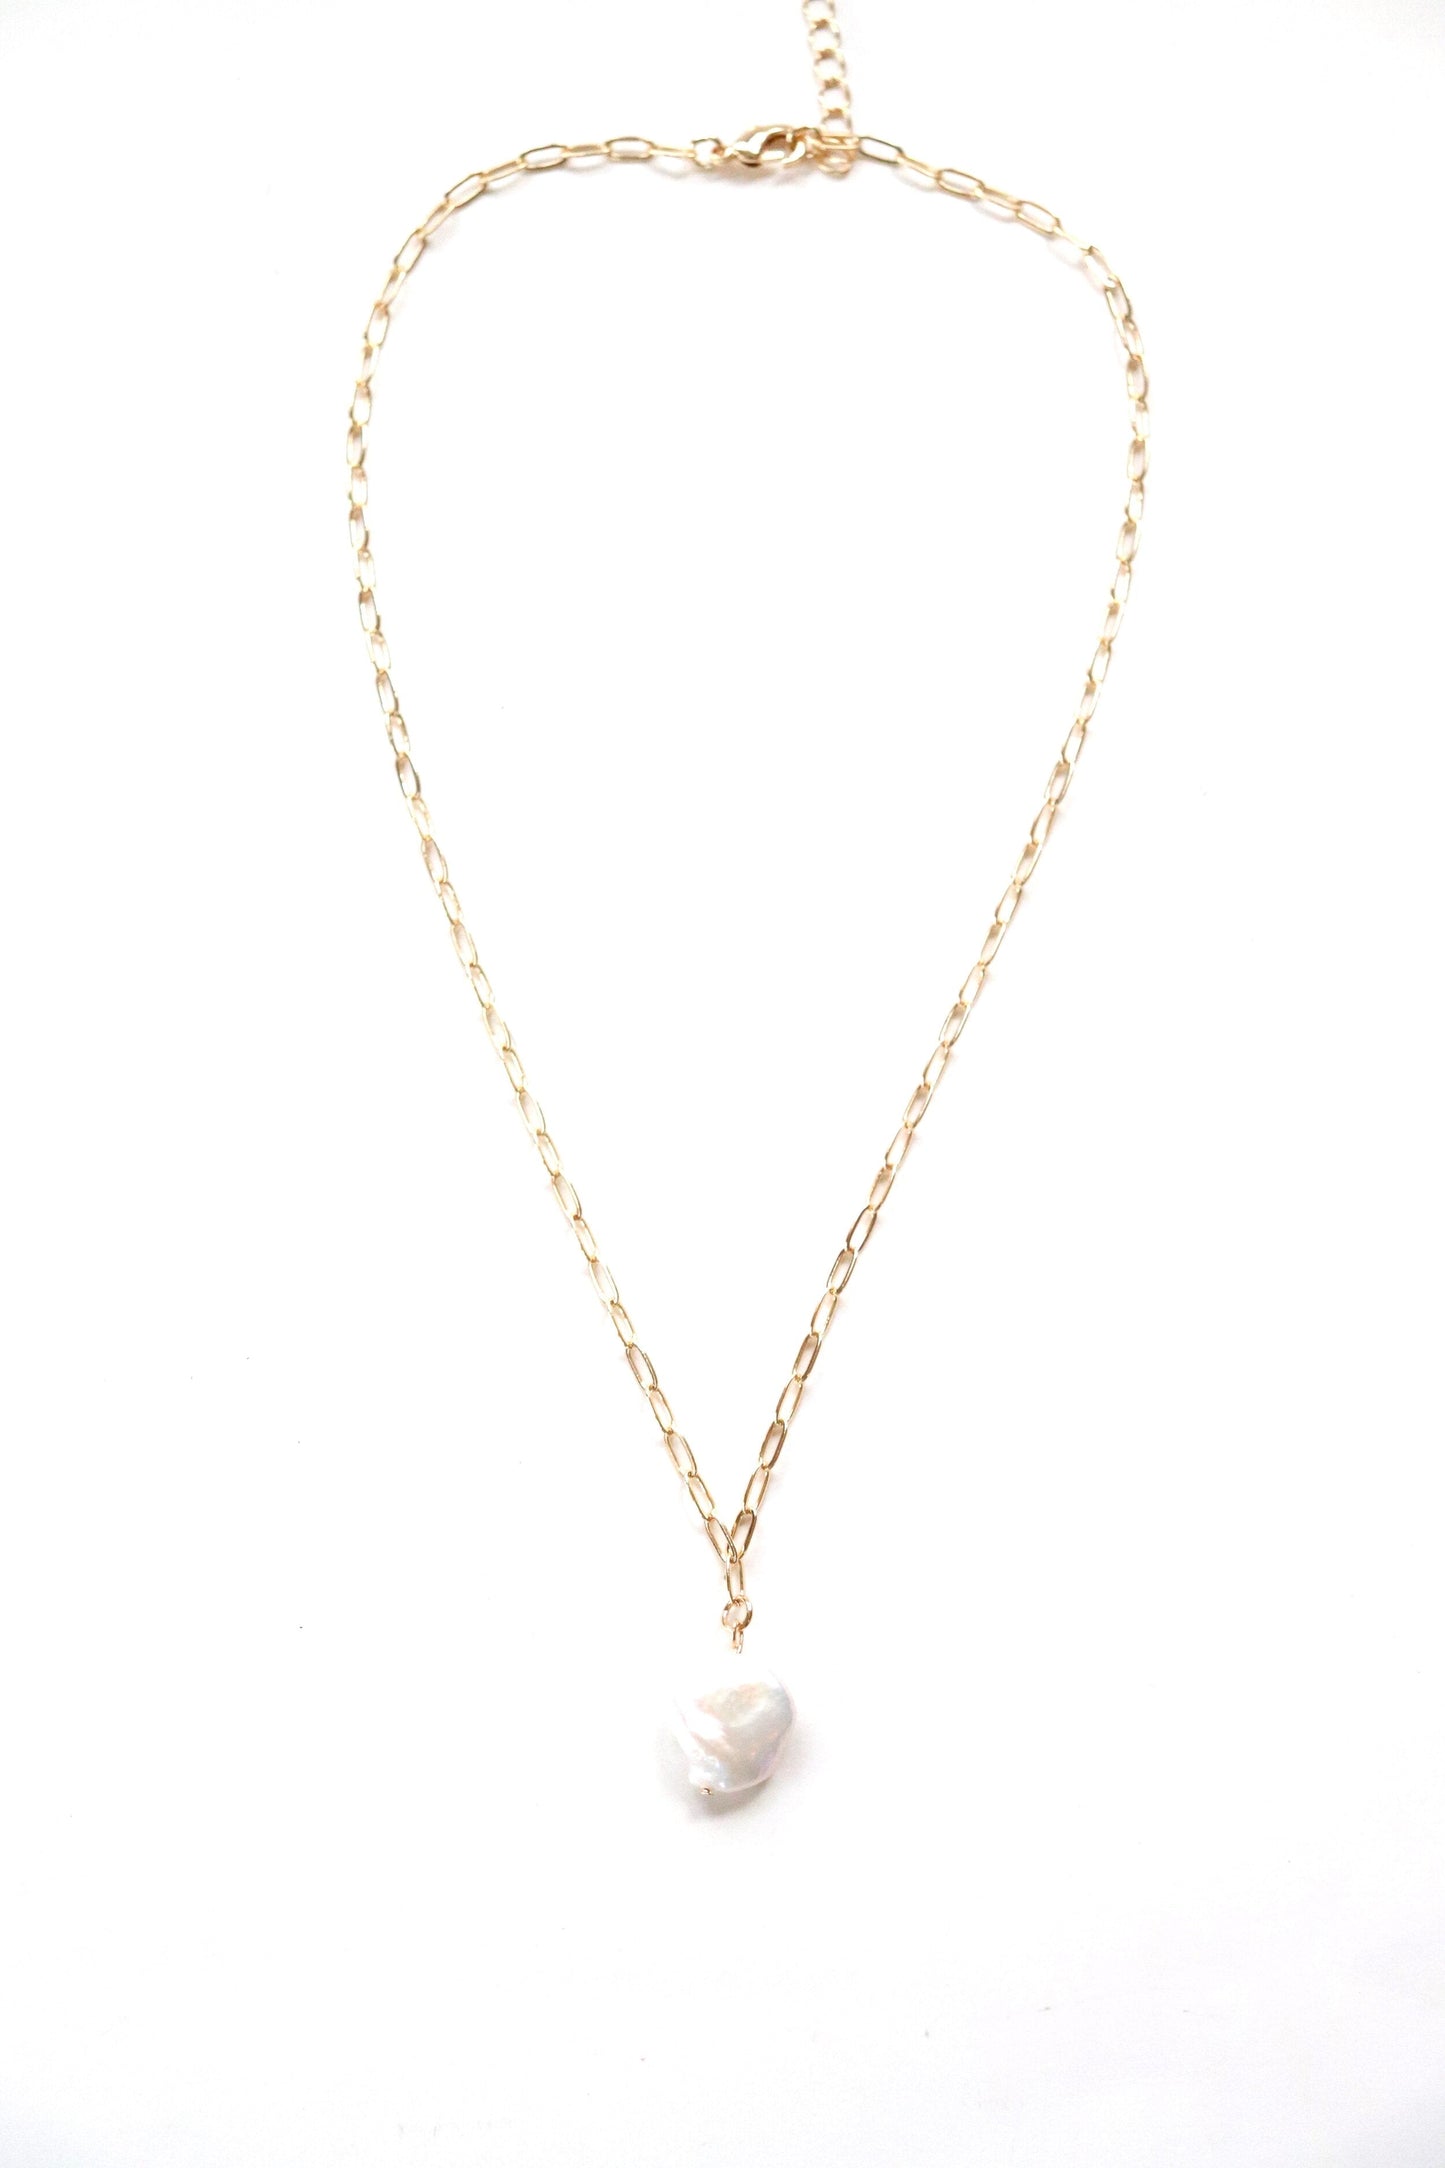 Gold Chain Necklace With a Pearl - Waterproof